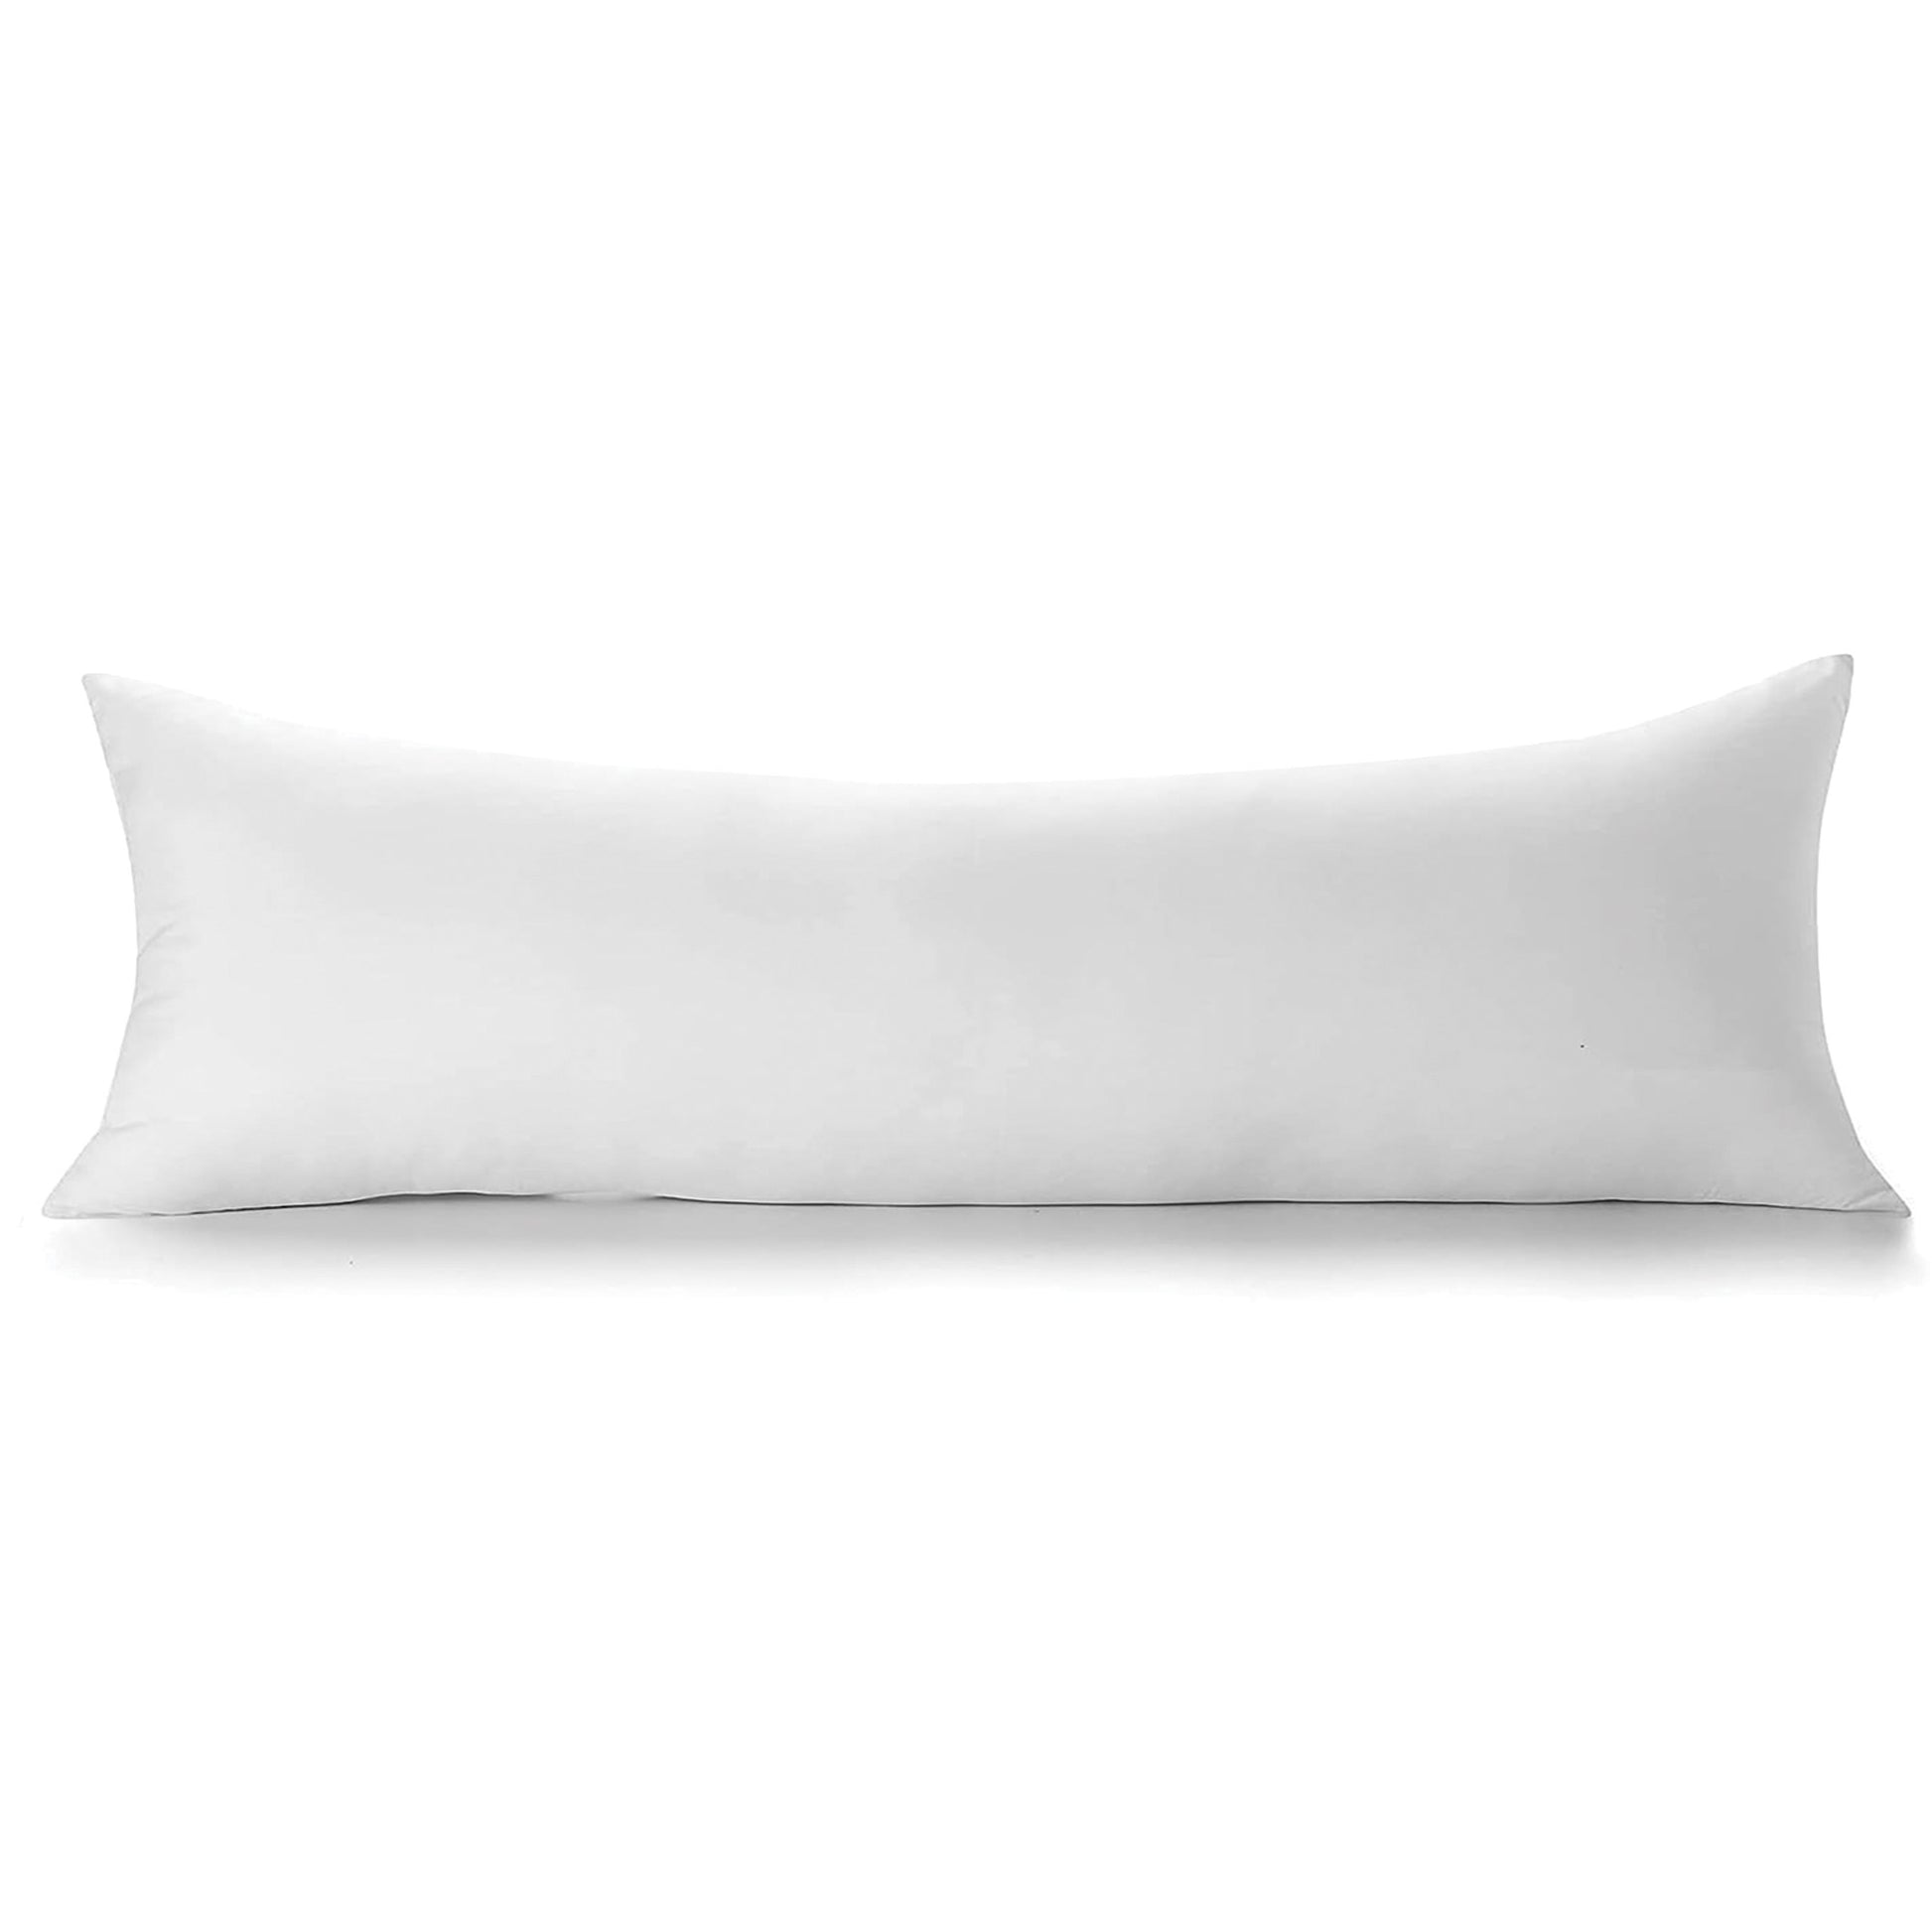 A pristine white body pillow filled with 100% goose down, featuring a lofty 600 fill power for ultimate softness and comfort.